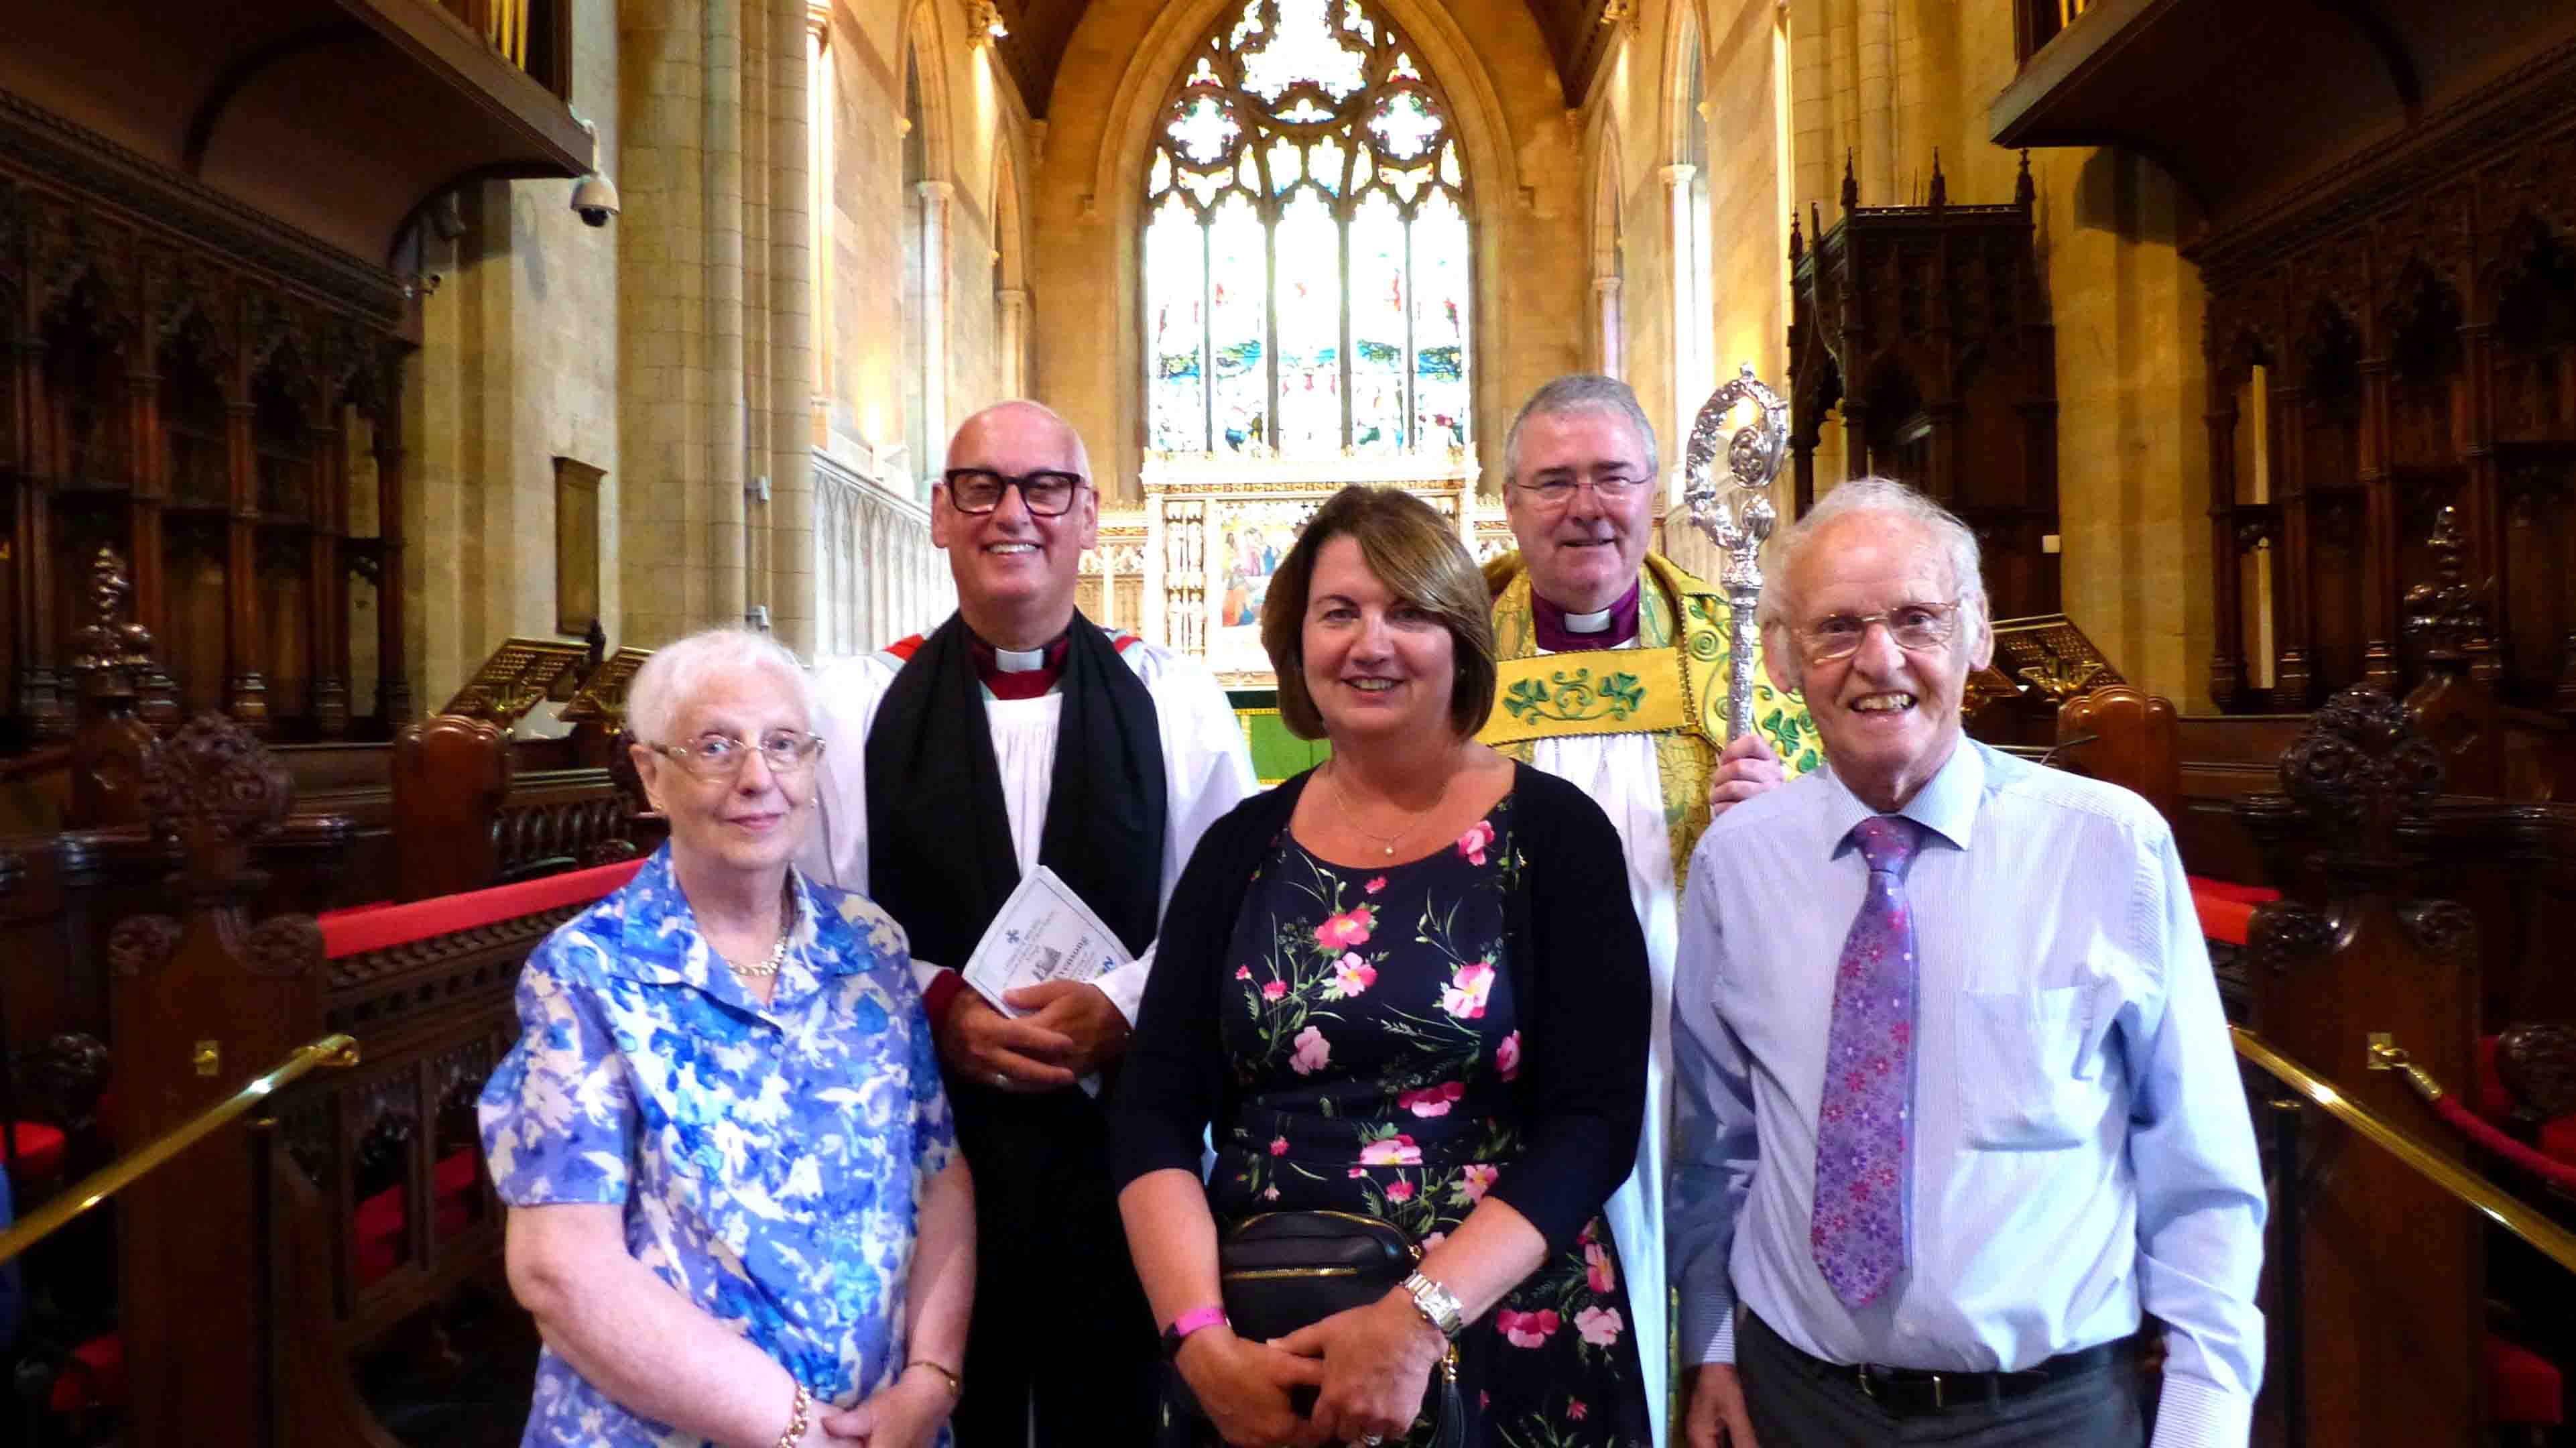 All Ireland Mothers' Union Chaplain Archdeacon Stephen McBride and Archbishop John McDowell at the Commissioning Service with Stephen's wife Helen and his parents Donald and Claire.